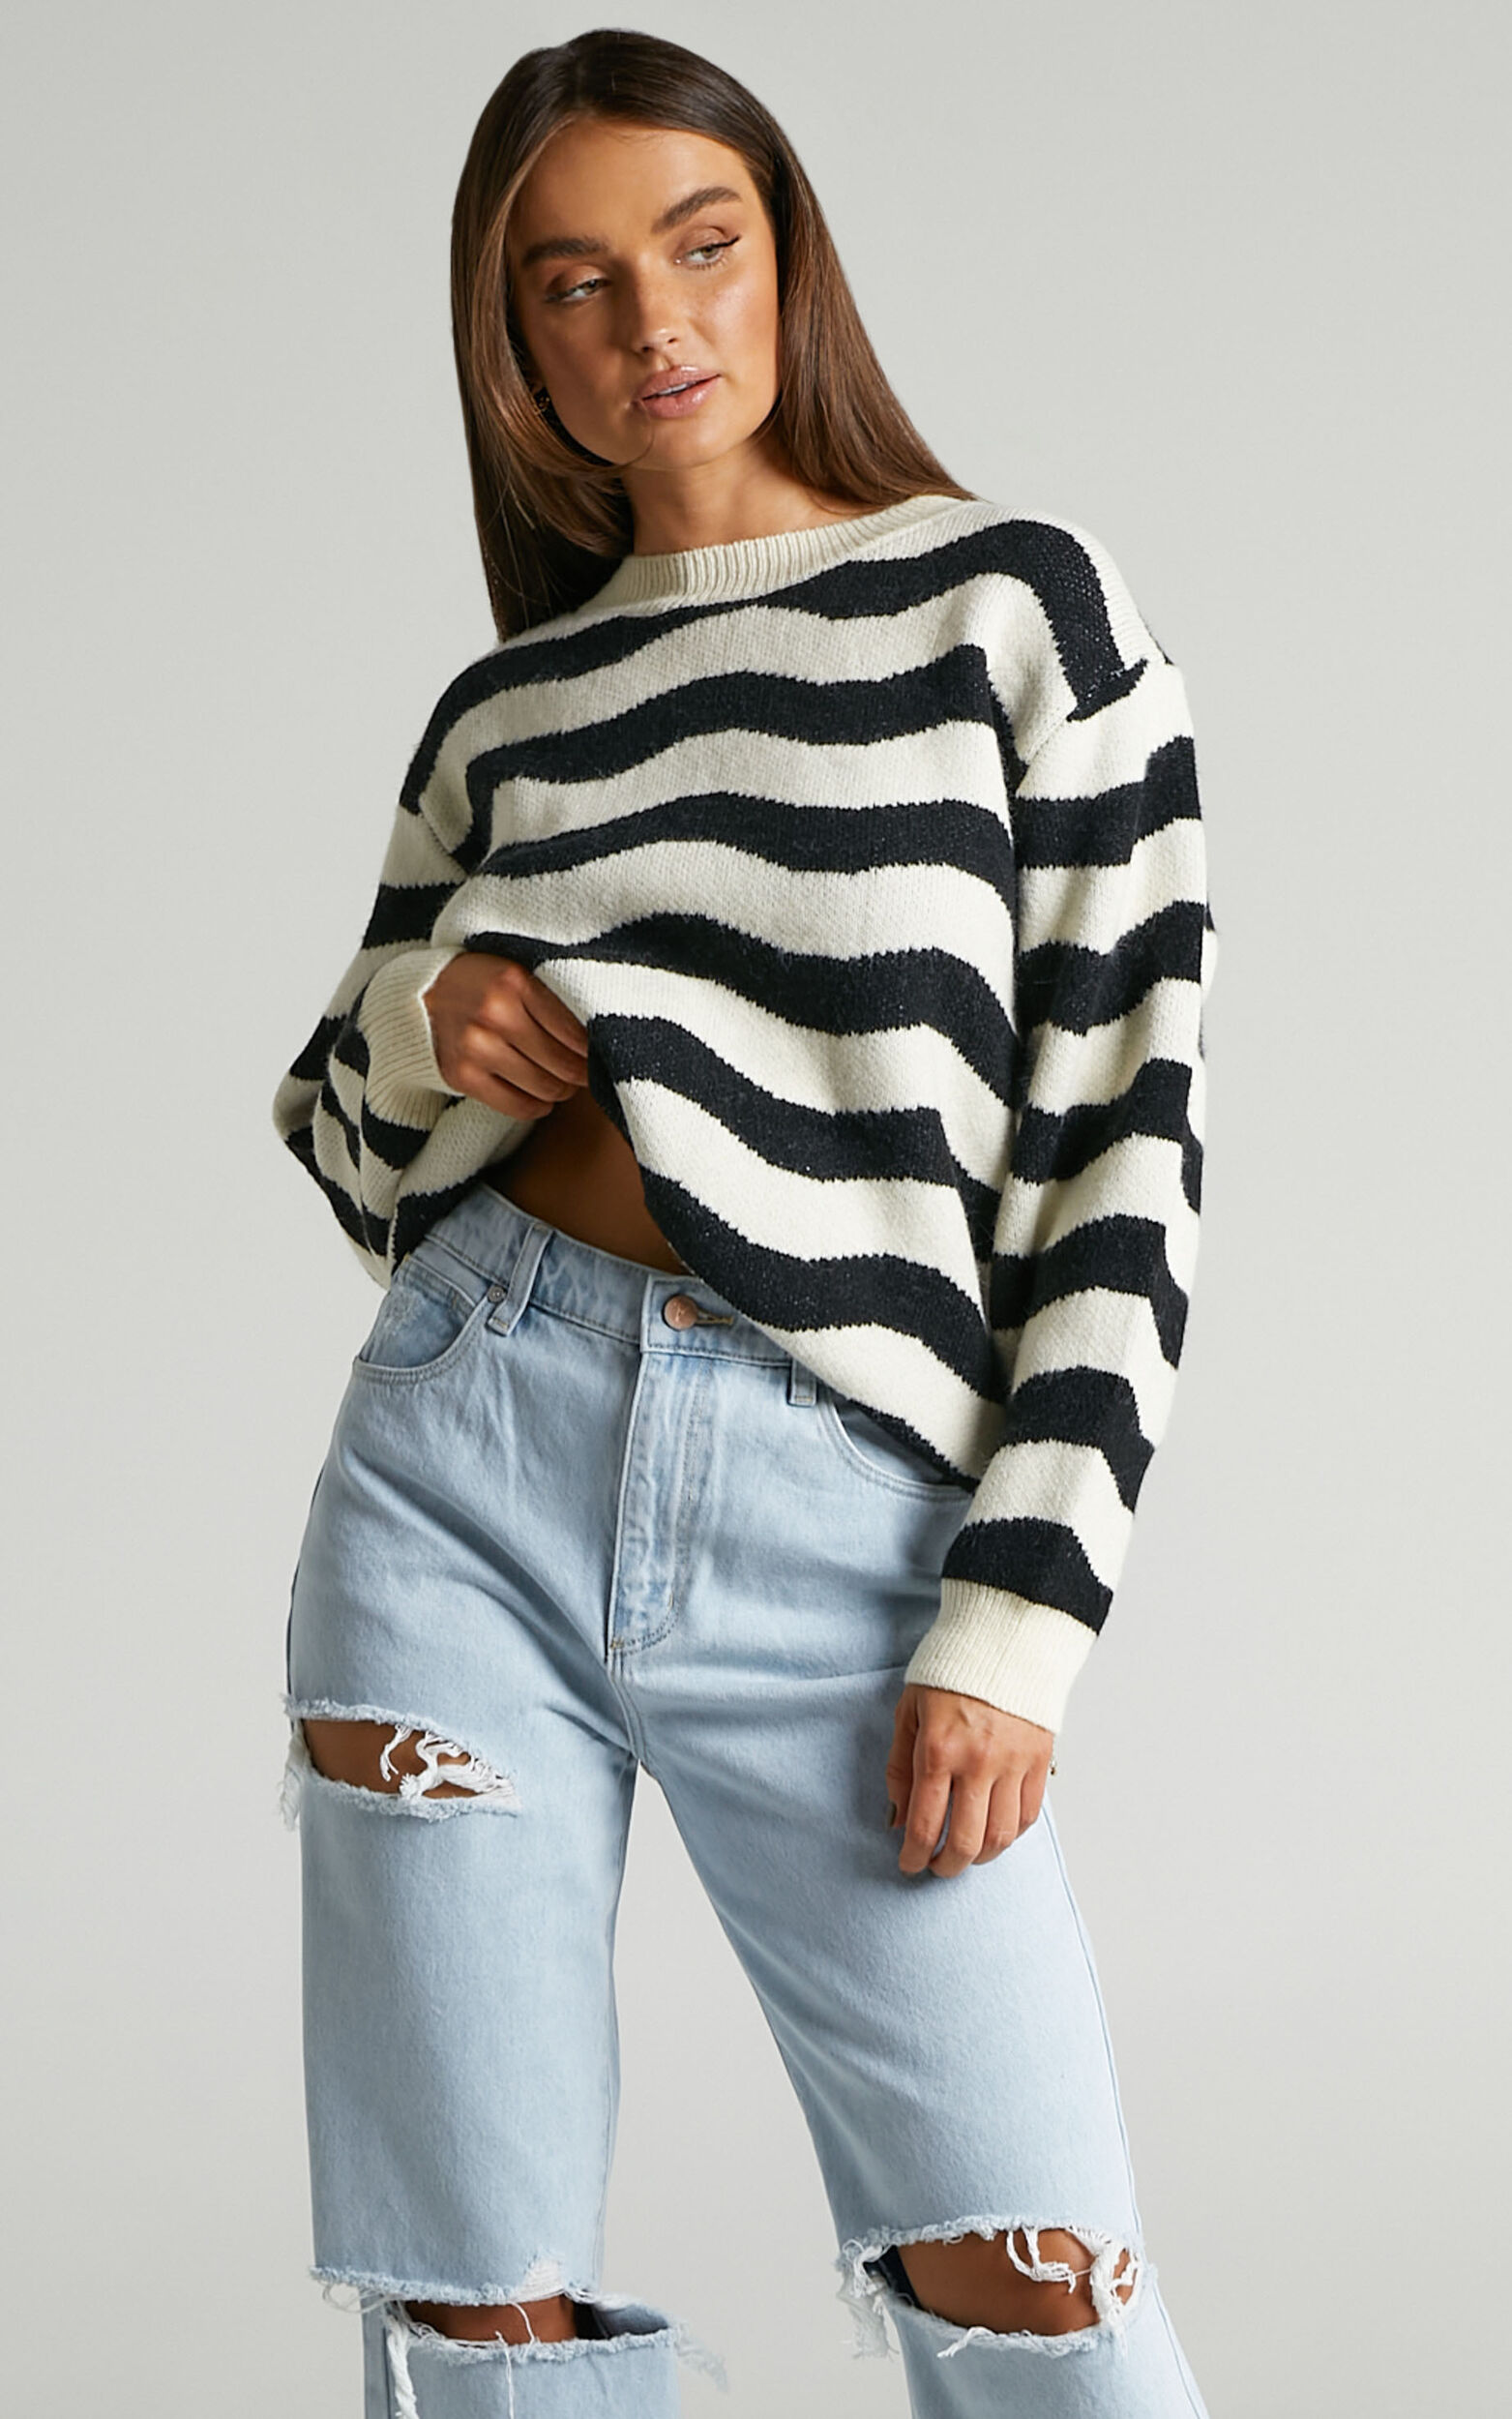 Meredith Oversized Striped Knit Jumper in Cream/Black - L, CRE1